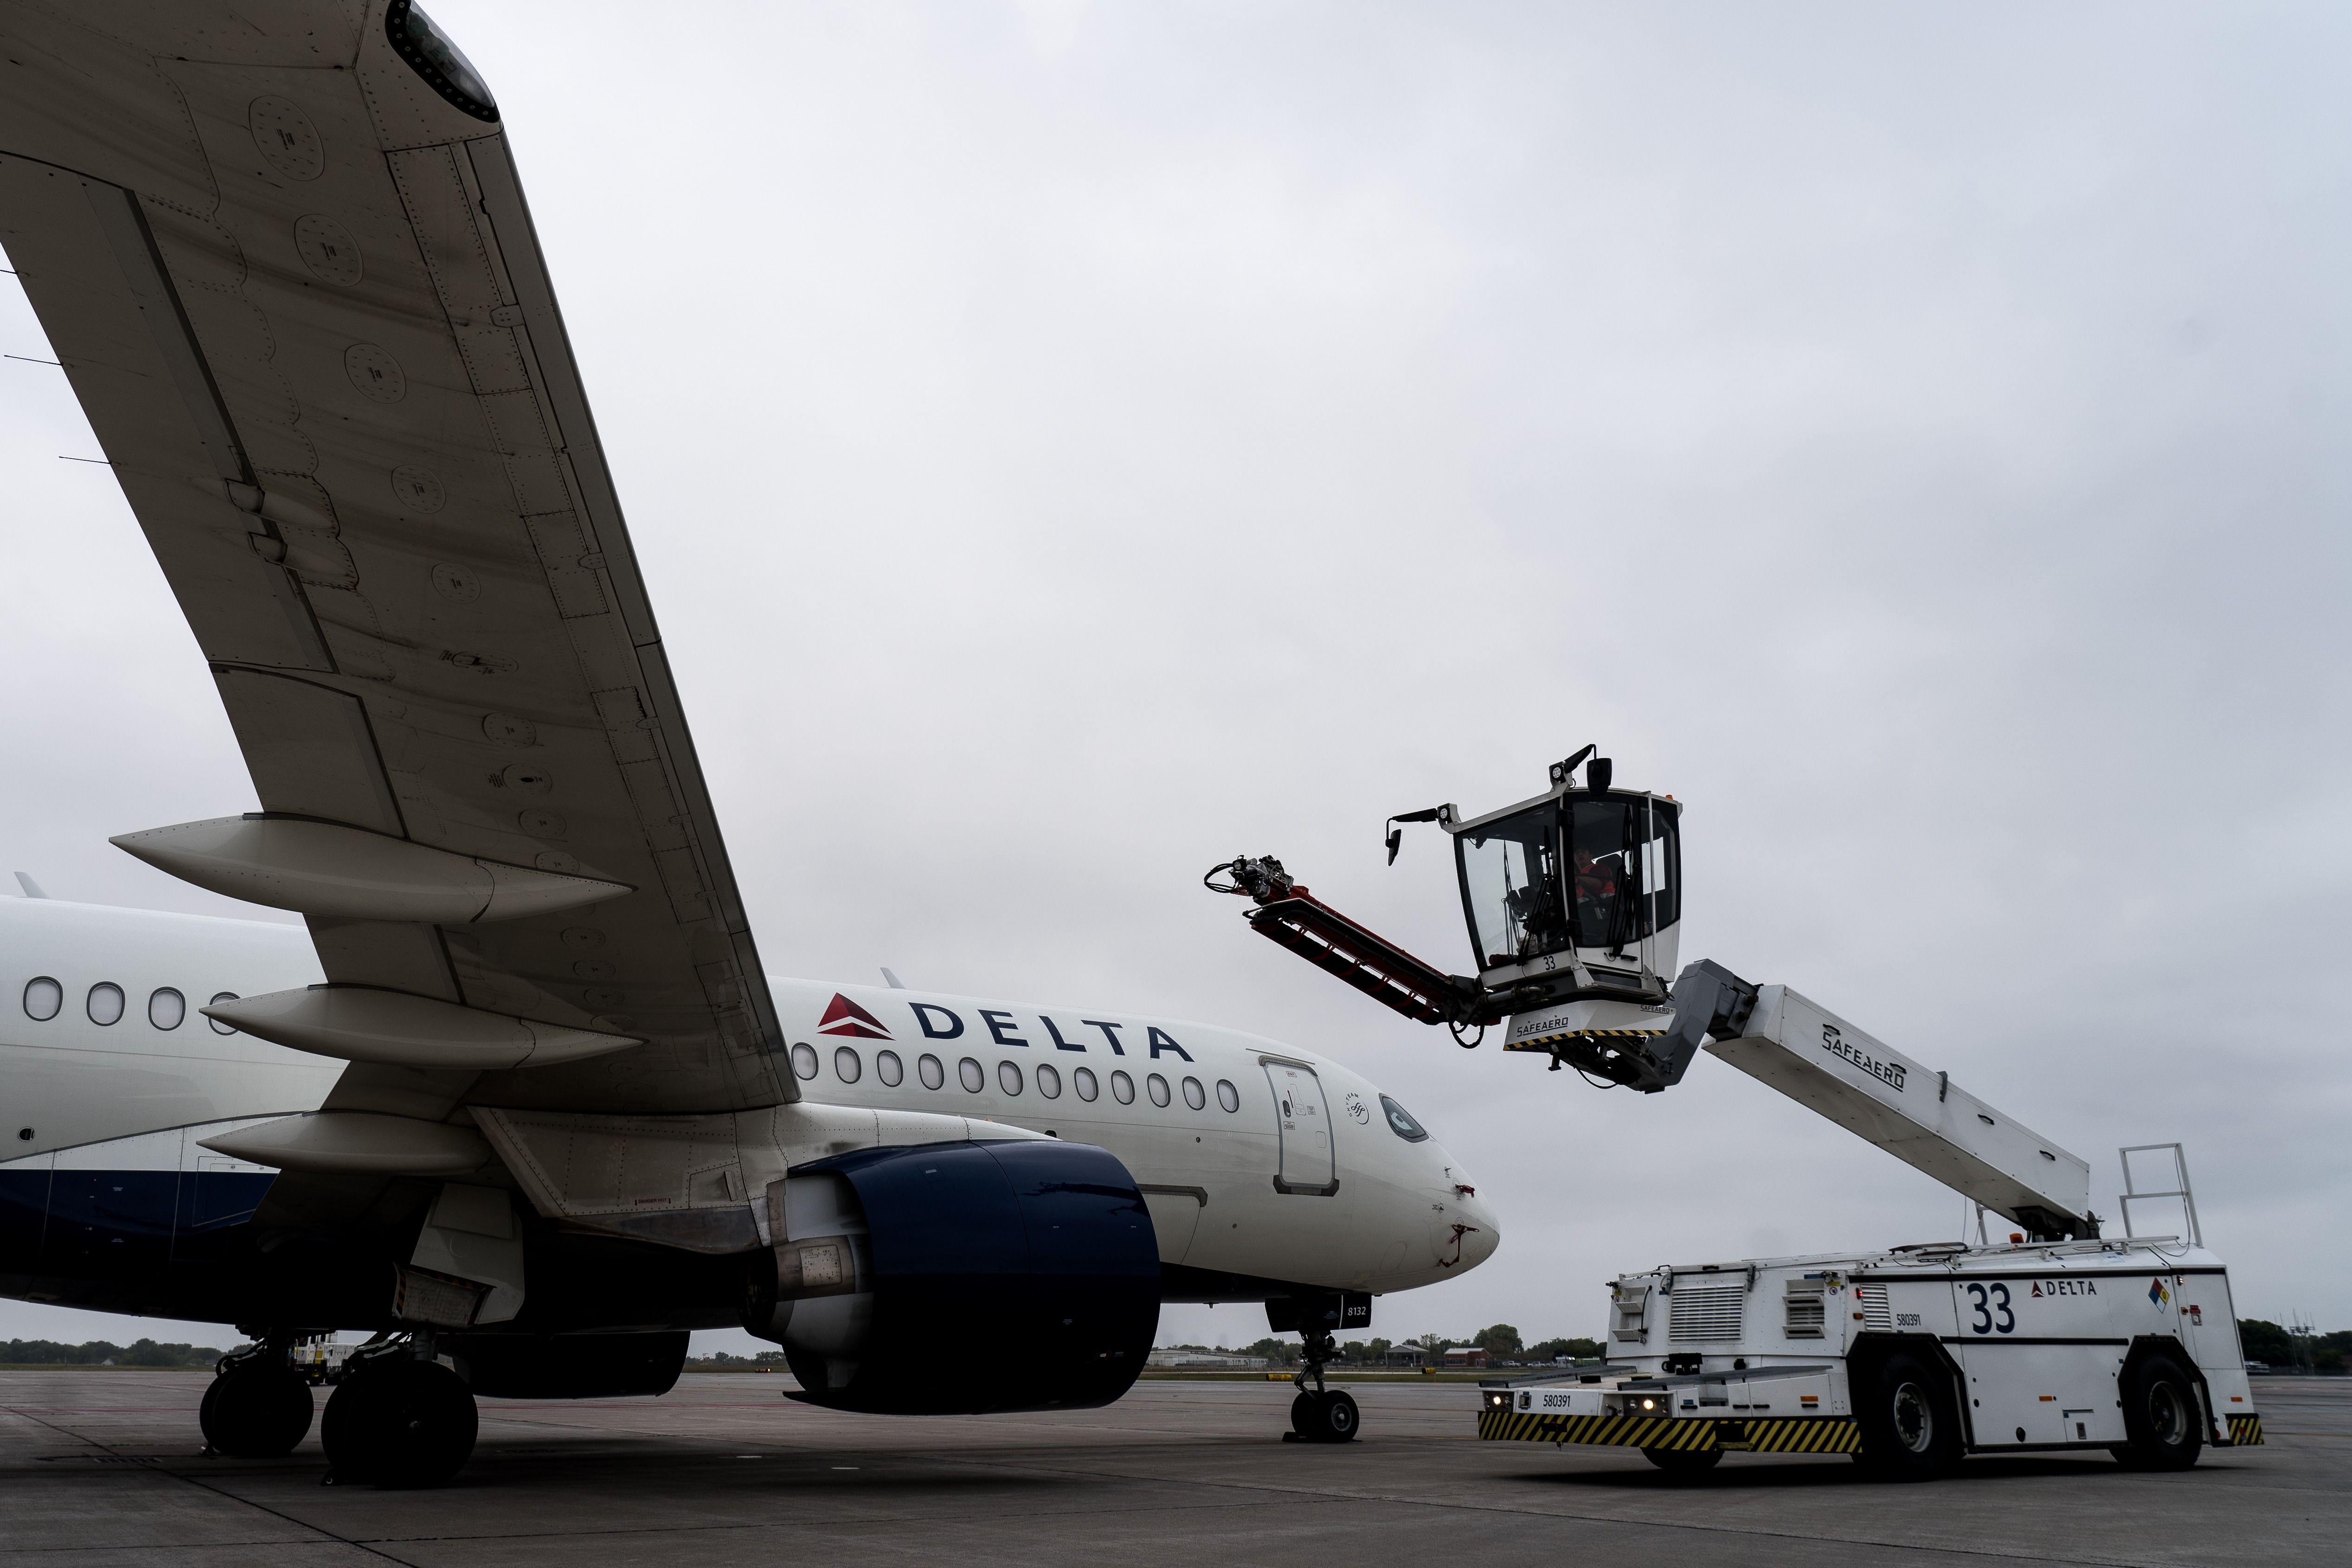 Delta Air Lines' deicing bootcamp at Minneapolis St. Paul International Airport.